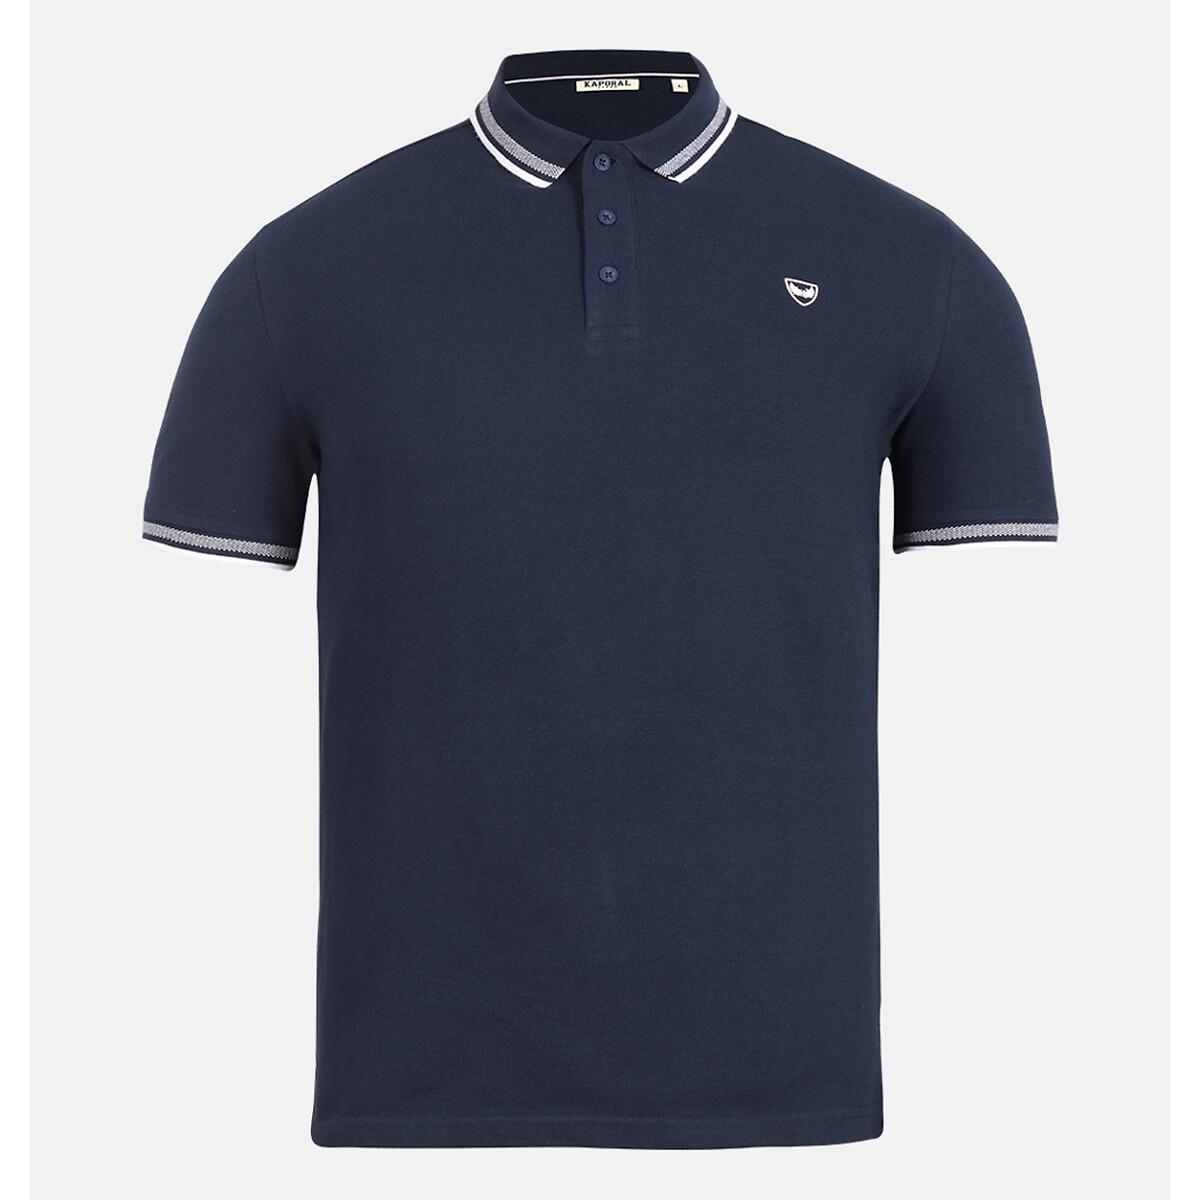 Rayoc Polo Shirt in Cotton Pique and Slim Fit